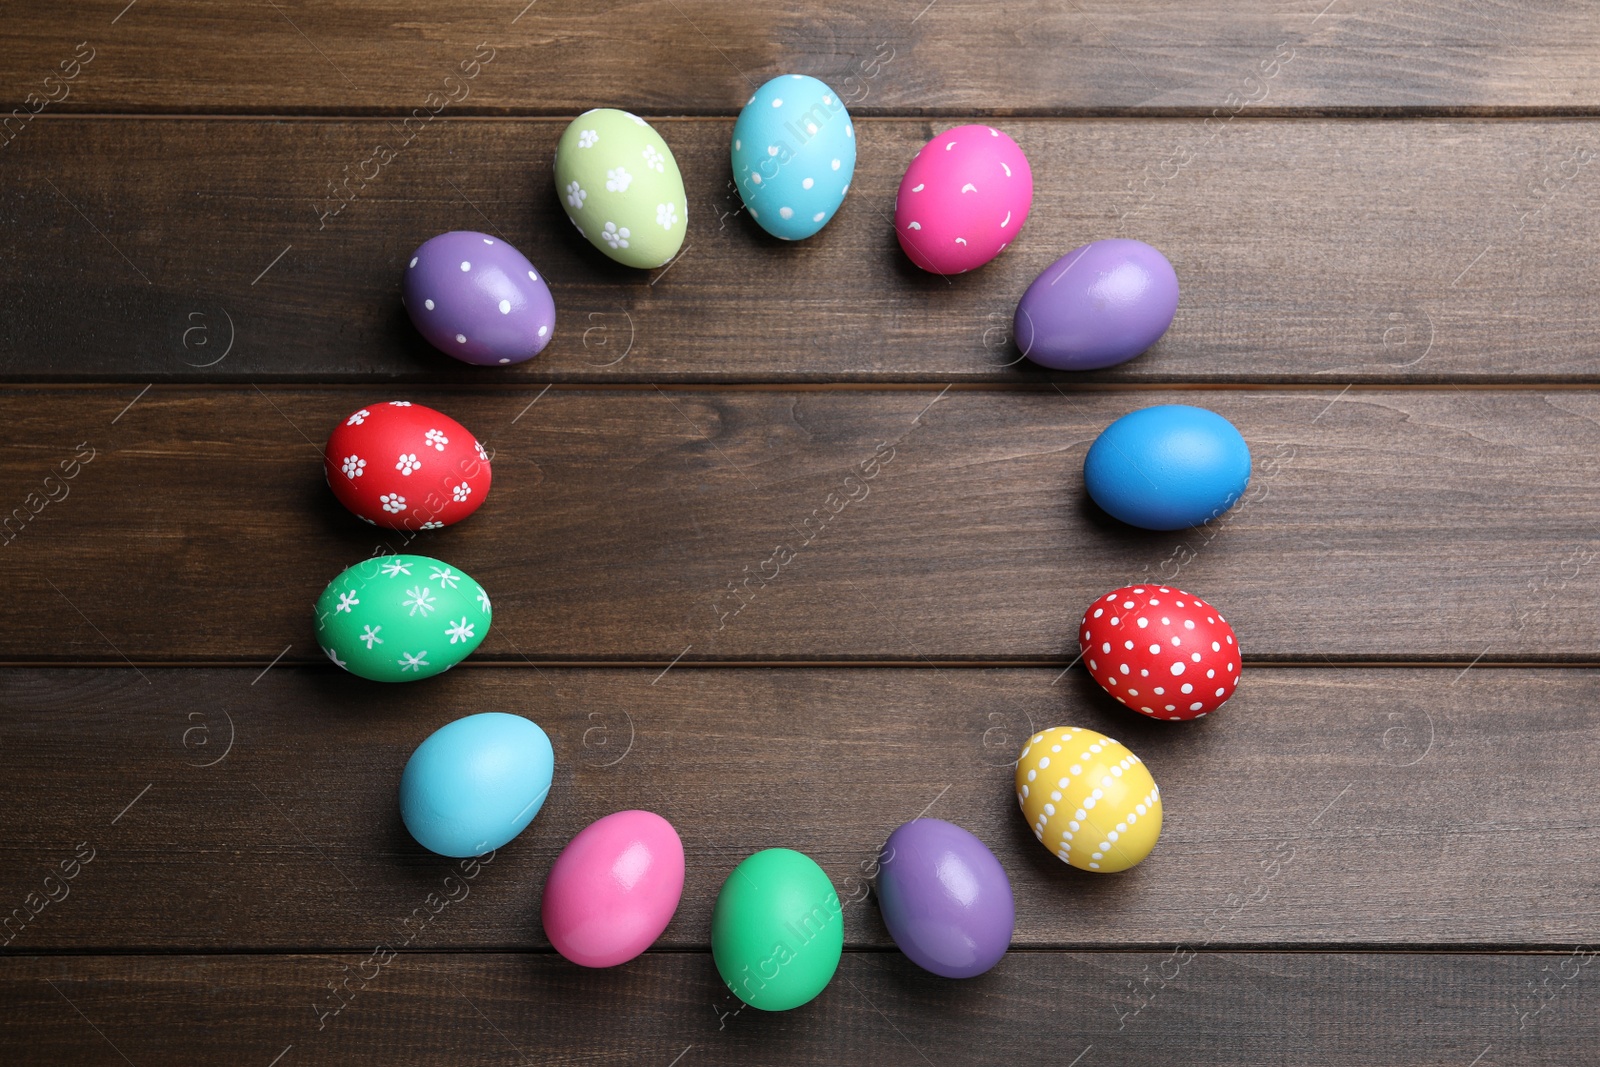 Photo of Frame of colorful eggs on wooden background, flat lay with space for text. Happy Easter